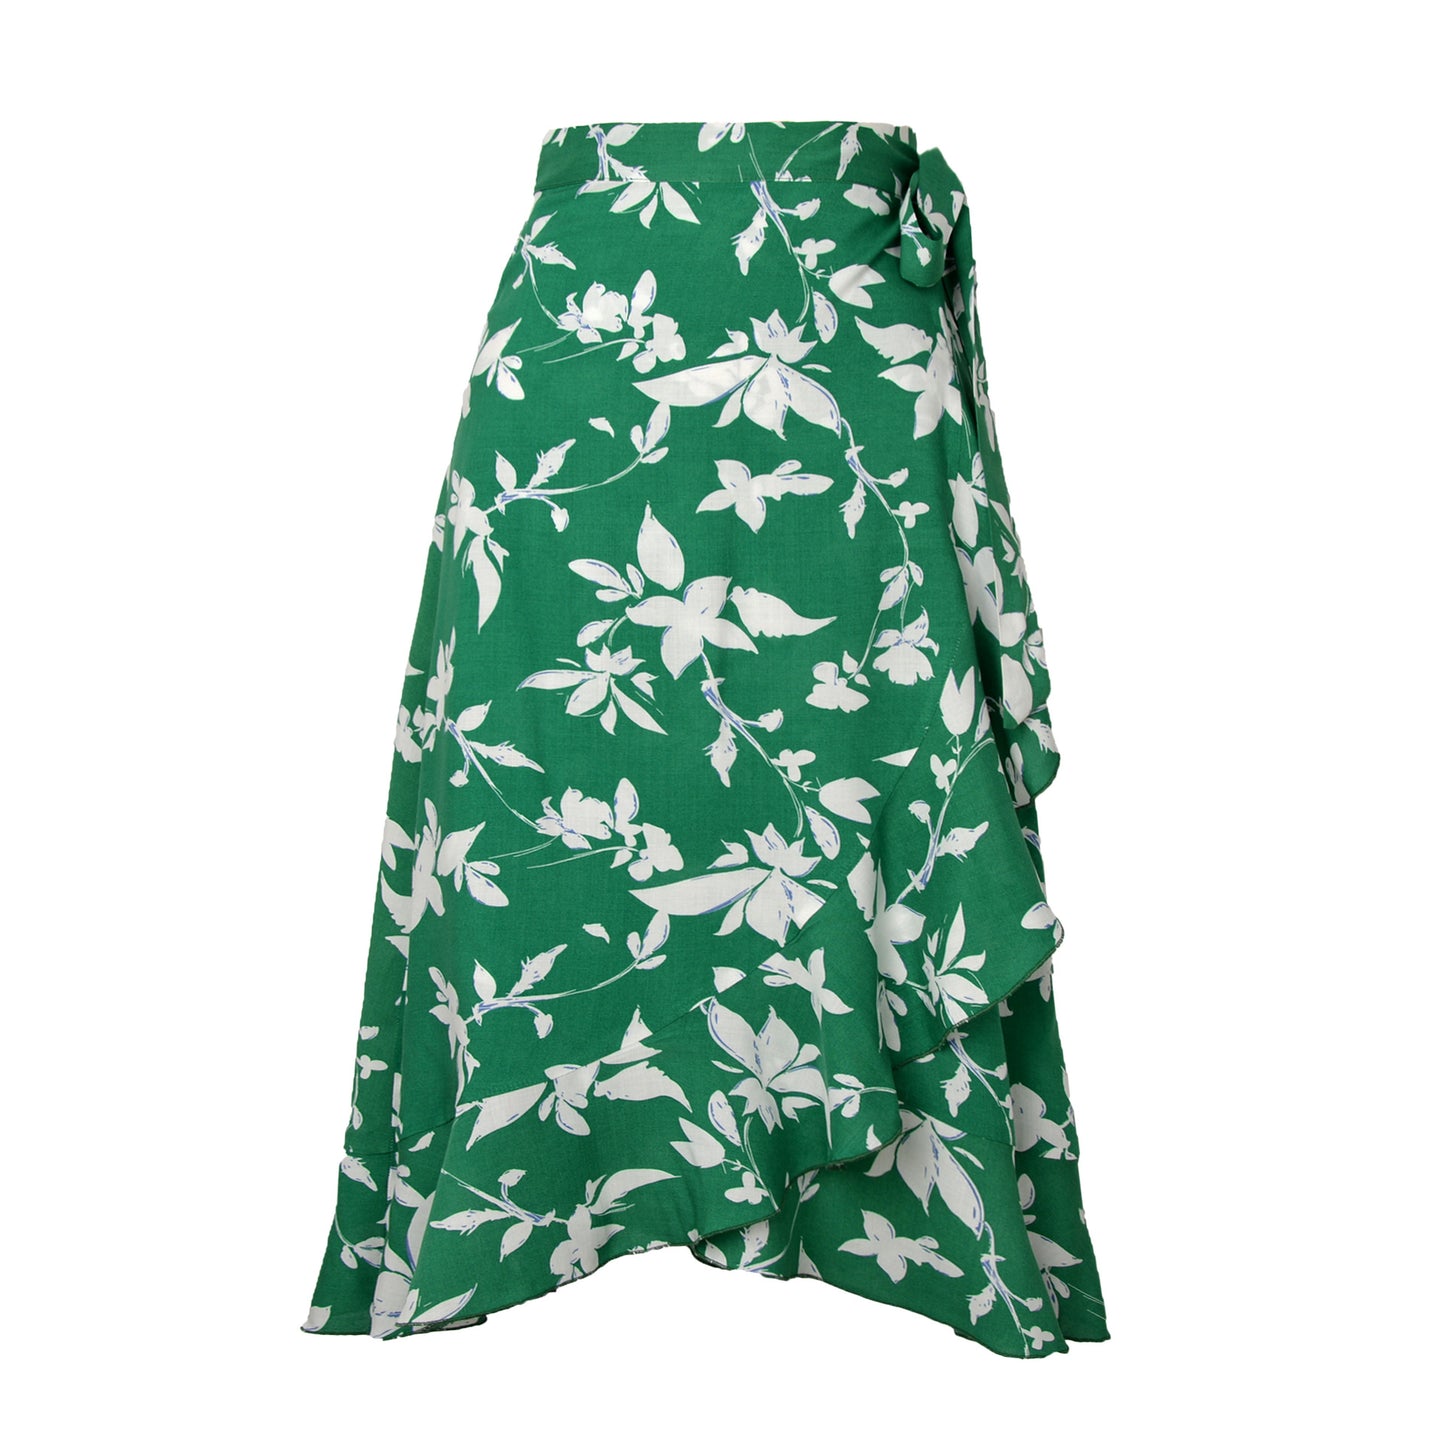 Floral Print Lace-up Summer Skirt - skirts - malbusaat.co.uk